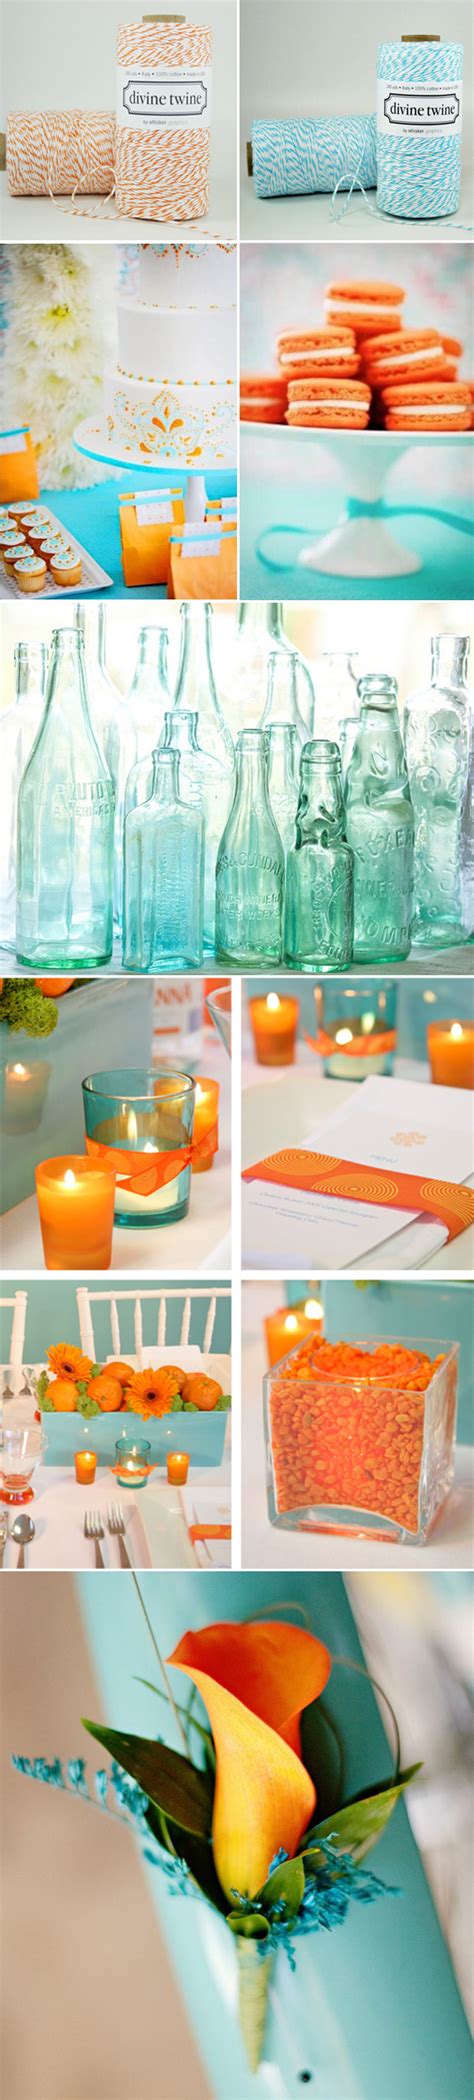 Spiced orange is the amazing shade of orange with a soft component of beige; Teal and Orange Wedding Inspiration Board